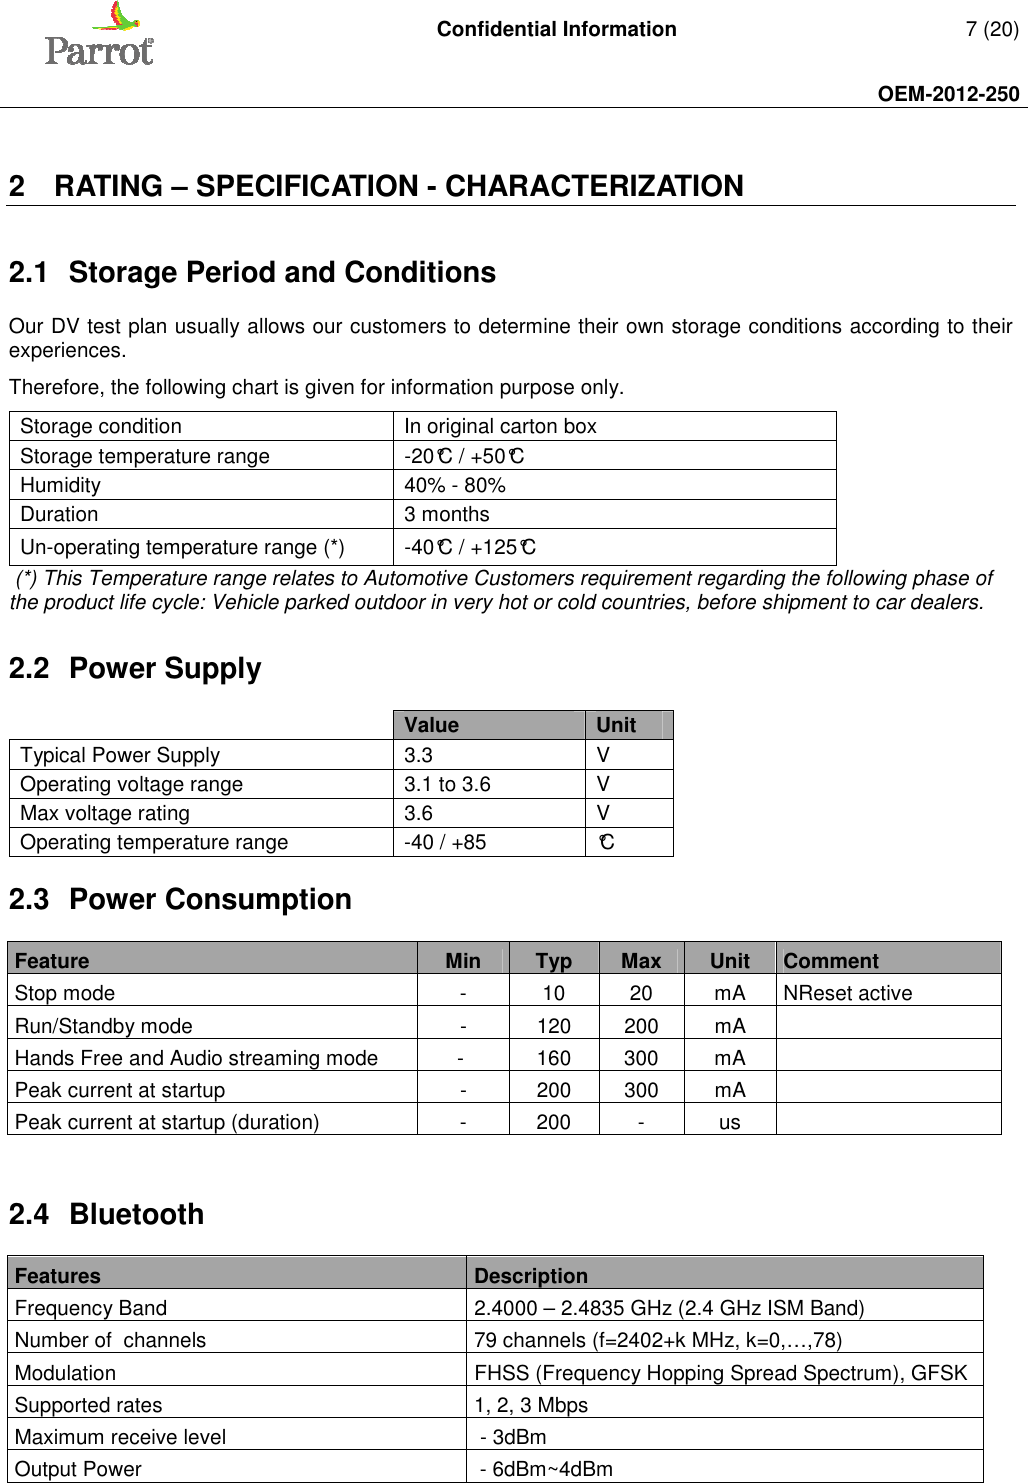   Confidential Information   7 (20)     OEM-2012-250    2  RATING – SPECIFICATION - CHARACTERIZATION  2.1  Storage Period and Conditions Our DV test plan usually allows our customers to determine their own storage conditions according to their experiences. Therefore, the following chart is given for information purpose only. Storage condition  In original carton box Storage temperature range  -20°C / +50°C Humidity  40% - 80% Duration  3 months Un-operating temperature range (*)  -40°C / +125°C  (*) This Temperature range relates to Automotive Customers requirement regarding the following phase of the product life cycle: Vehicle parked outdoor in very hot or cold countries, before shipment to car dealers. 2.2  Power Supply   Value Unit Typical Power Supply   3.3  V Operating voltage range   3.1 to 3.6  V Max voltage rating   3.6  V Operating temperature range   -40 / +85  °C 2.3  Power Consumption  Feature  Min  Typ  Max  Unit  Comment Stop mode  -  10  20  mA  NReset active Run/Standby mode  -  120  200  mA    Hands Free and Audio streaming mode  -   160  300  mA    Peak current at startup  -  200  300  mA    Peak current at startup (duration)  -  200  -  us     2.4  Bluetooth  Features   Description Frequency Band   2.4000 – 2.4835 GHz (2.4 GHz ISM Band) Number of  channels  79 channels (f=2402+k MHz, k=0,…,78) Modulation   FHSS (Frequency Hopping Spread Spectrum), GFSK Supported rates   1, 2, 3 Mbps Maximum receive level    - 3dBm Output Power   - 6dBm~4dBm 